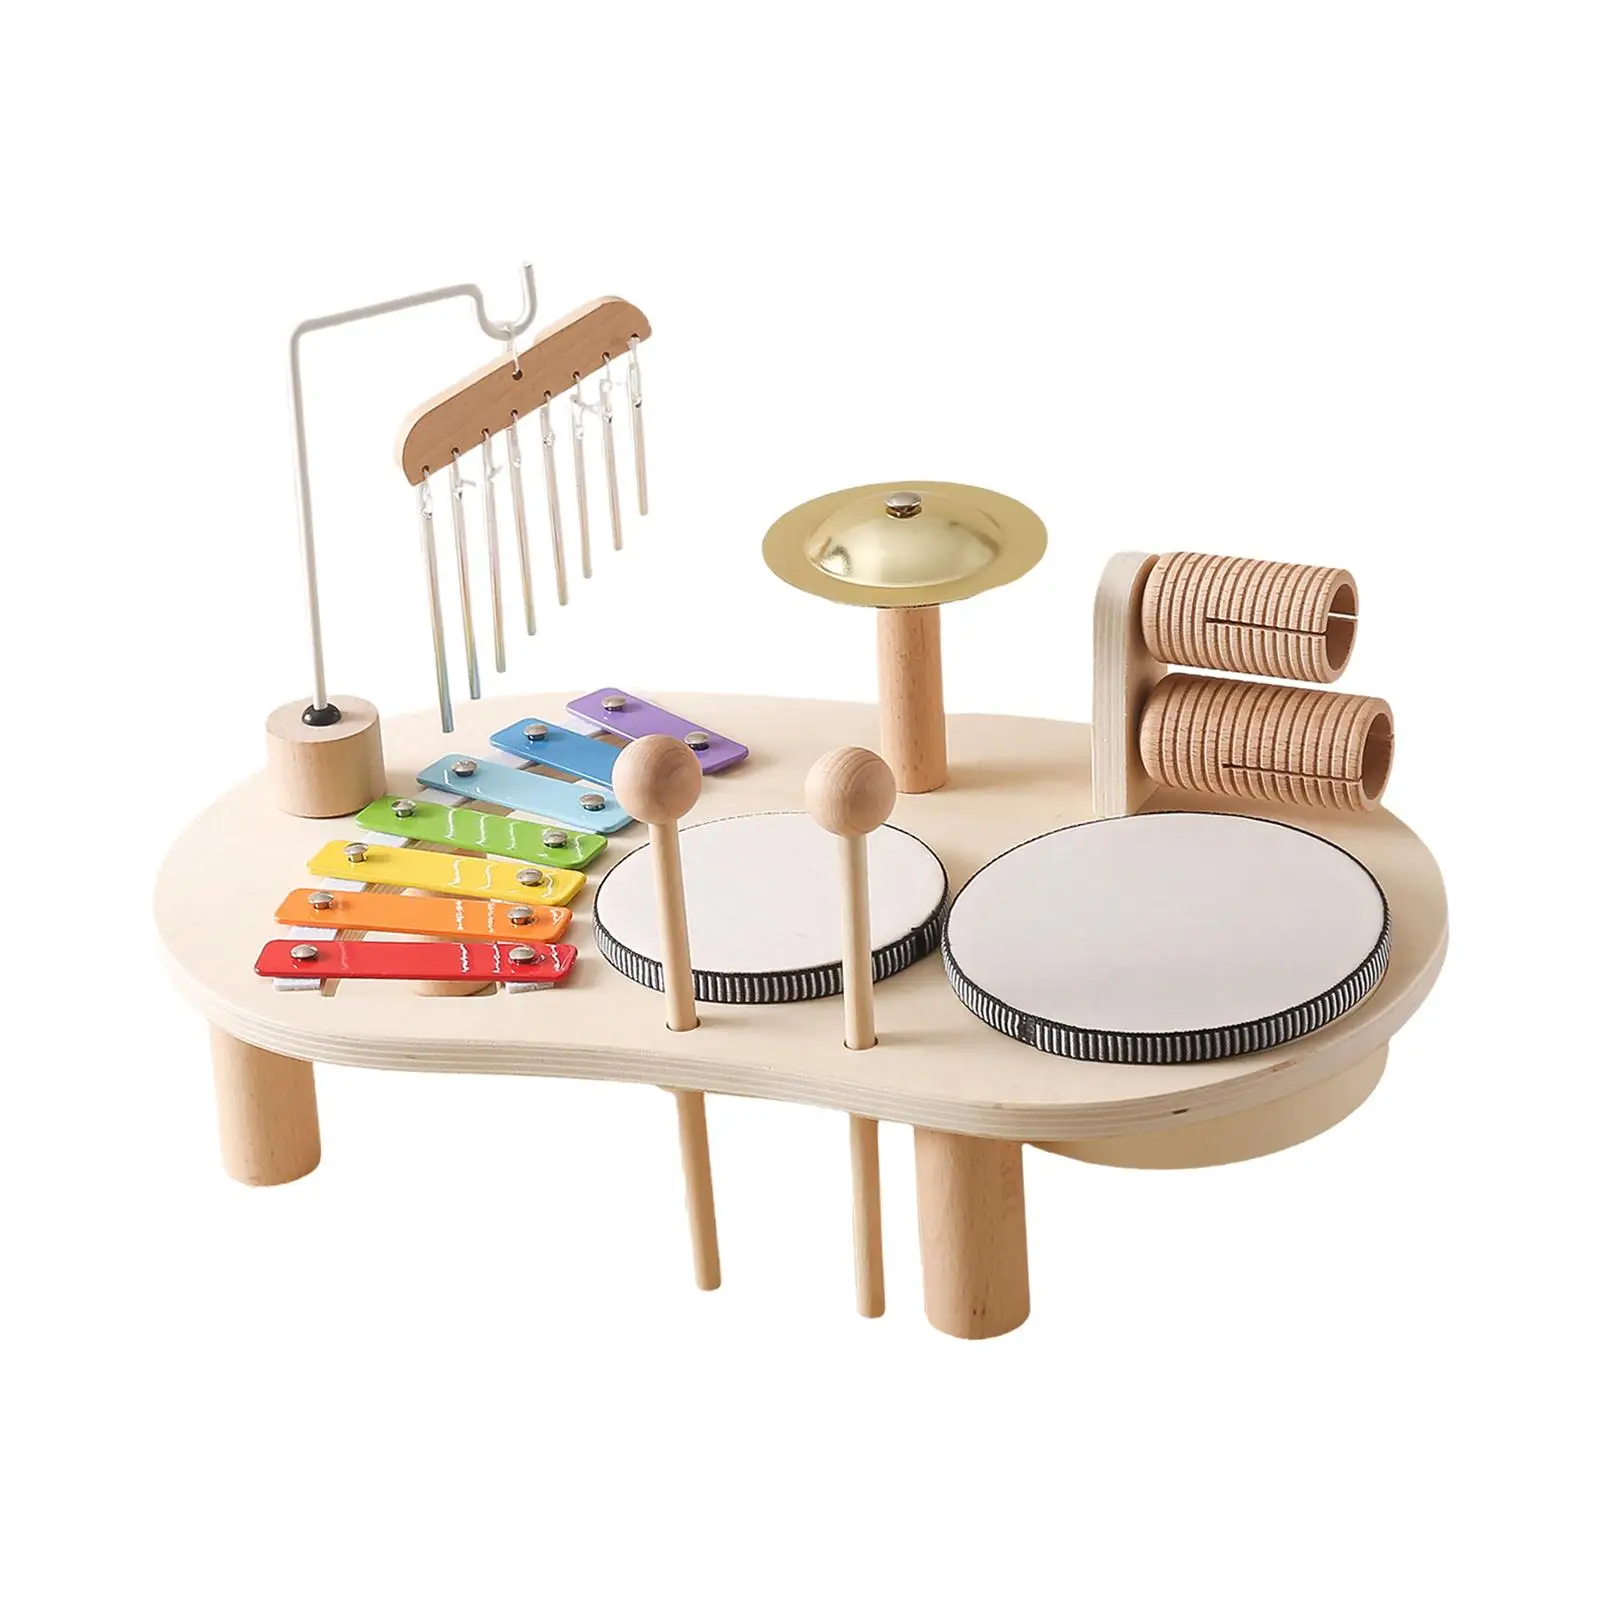 Kids Drum Set Creativity Hand Percussion Wooden Musical Kits